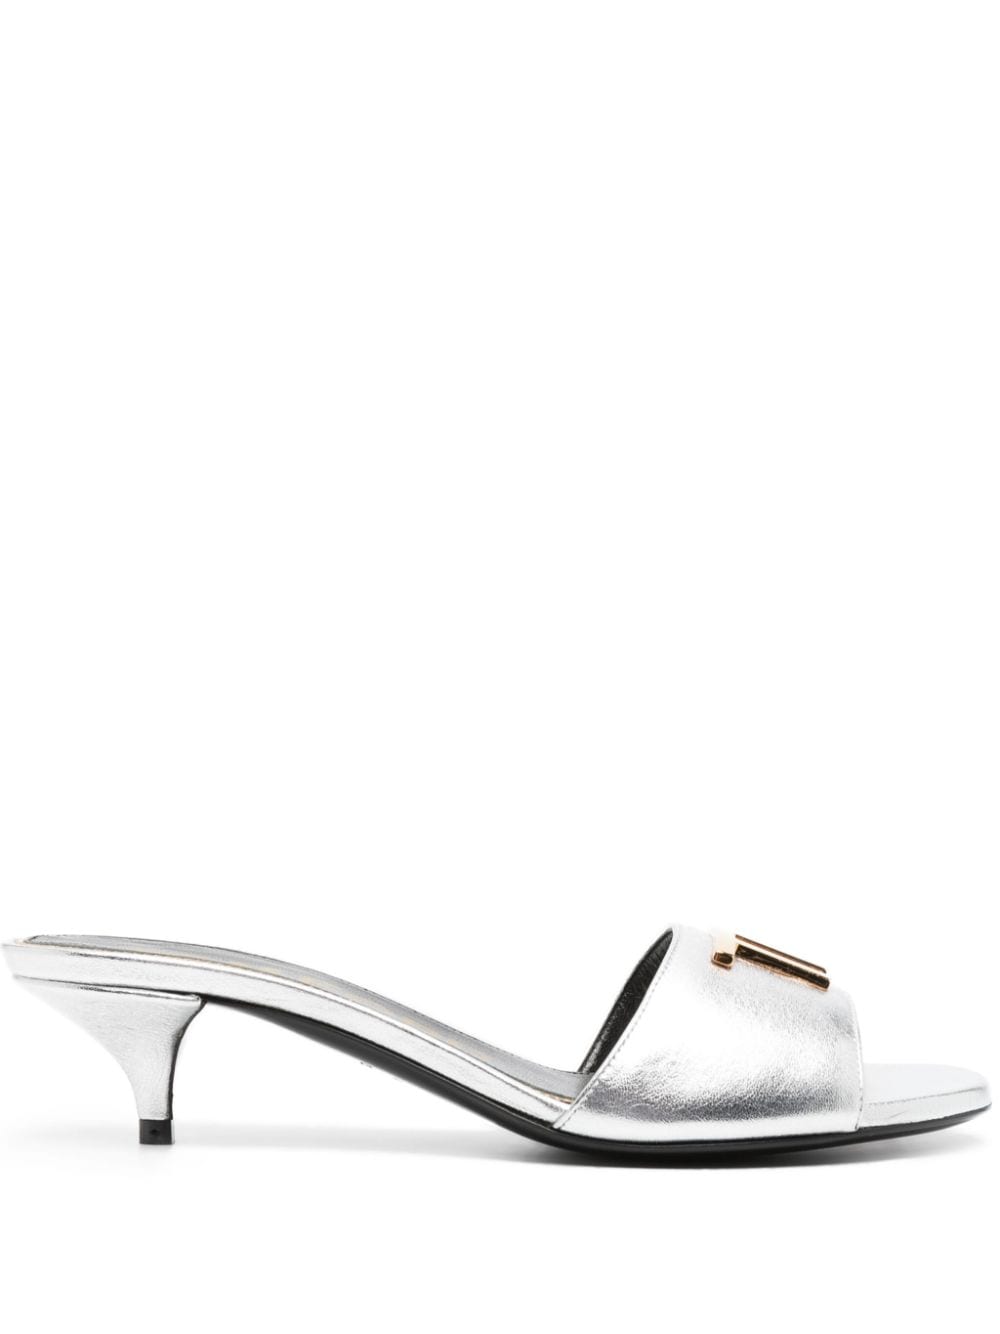 TOM FORD 50mm logo-plaque leather mules - Silver von TOM FORD